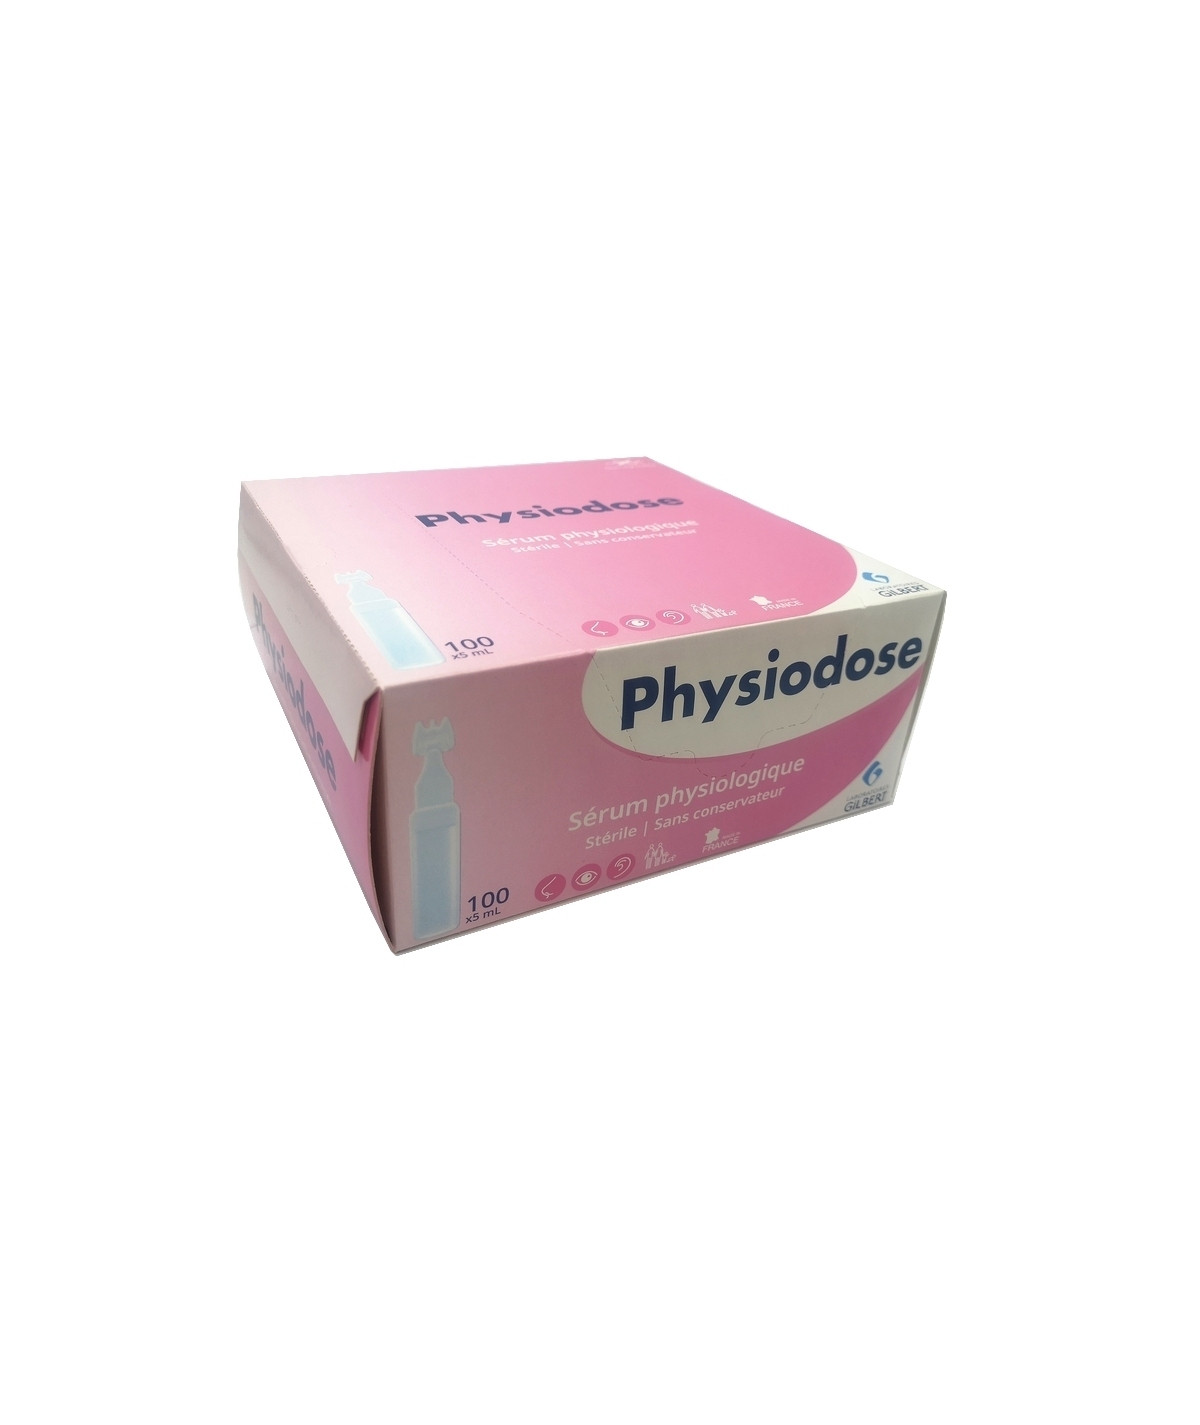 Gratuites Physiodose Serum Physiologique Sterile 40 x 5ml New in box